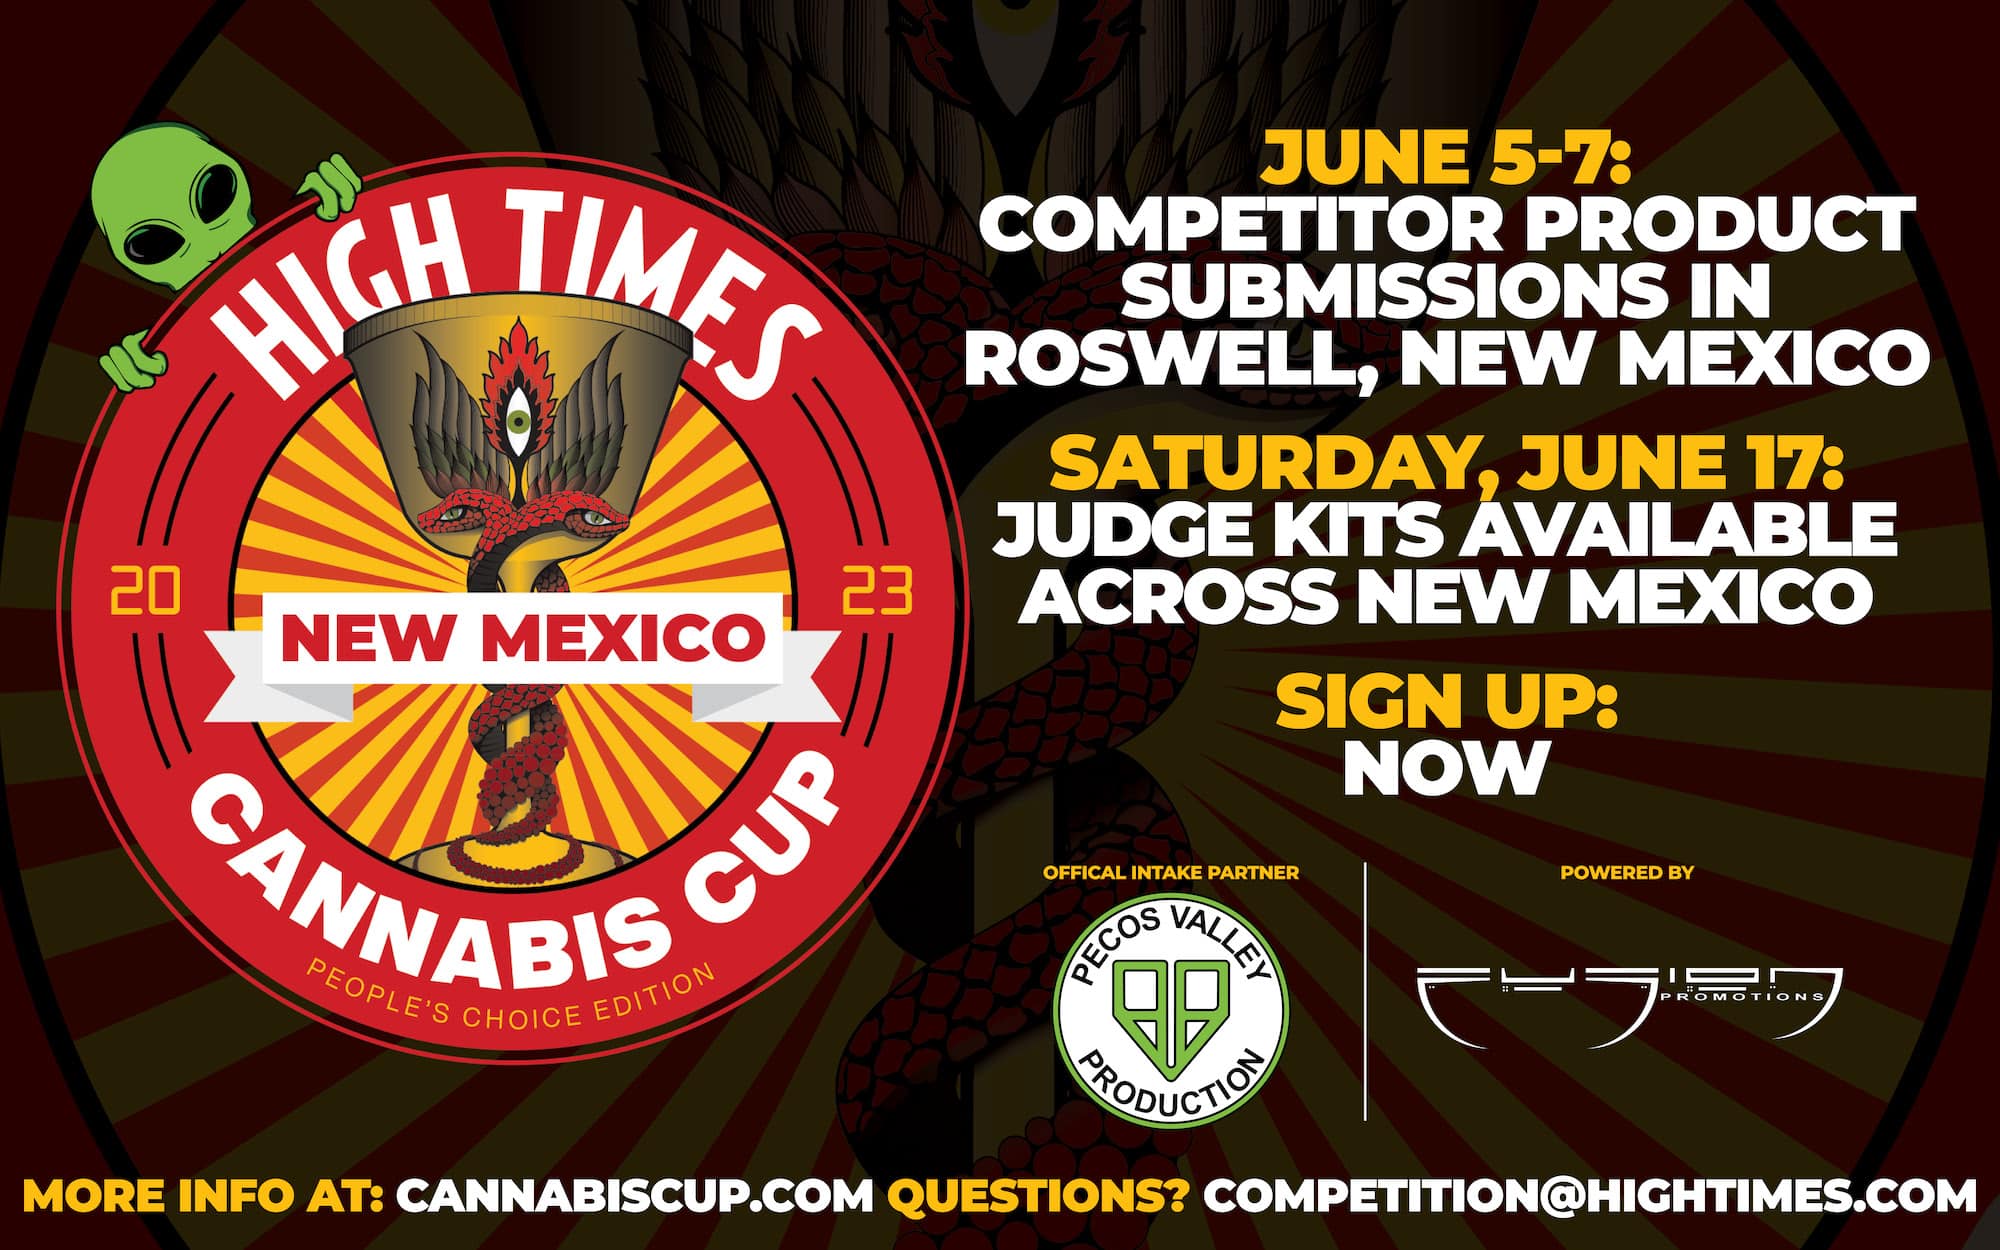 A High Times Cannabis Cup New Mexico bejelentése: People's Choice Edition 2023